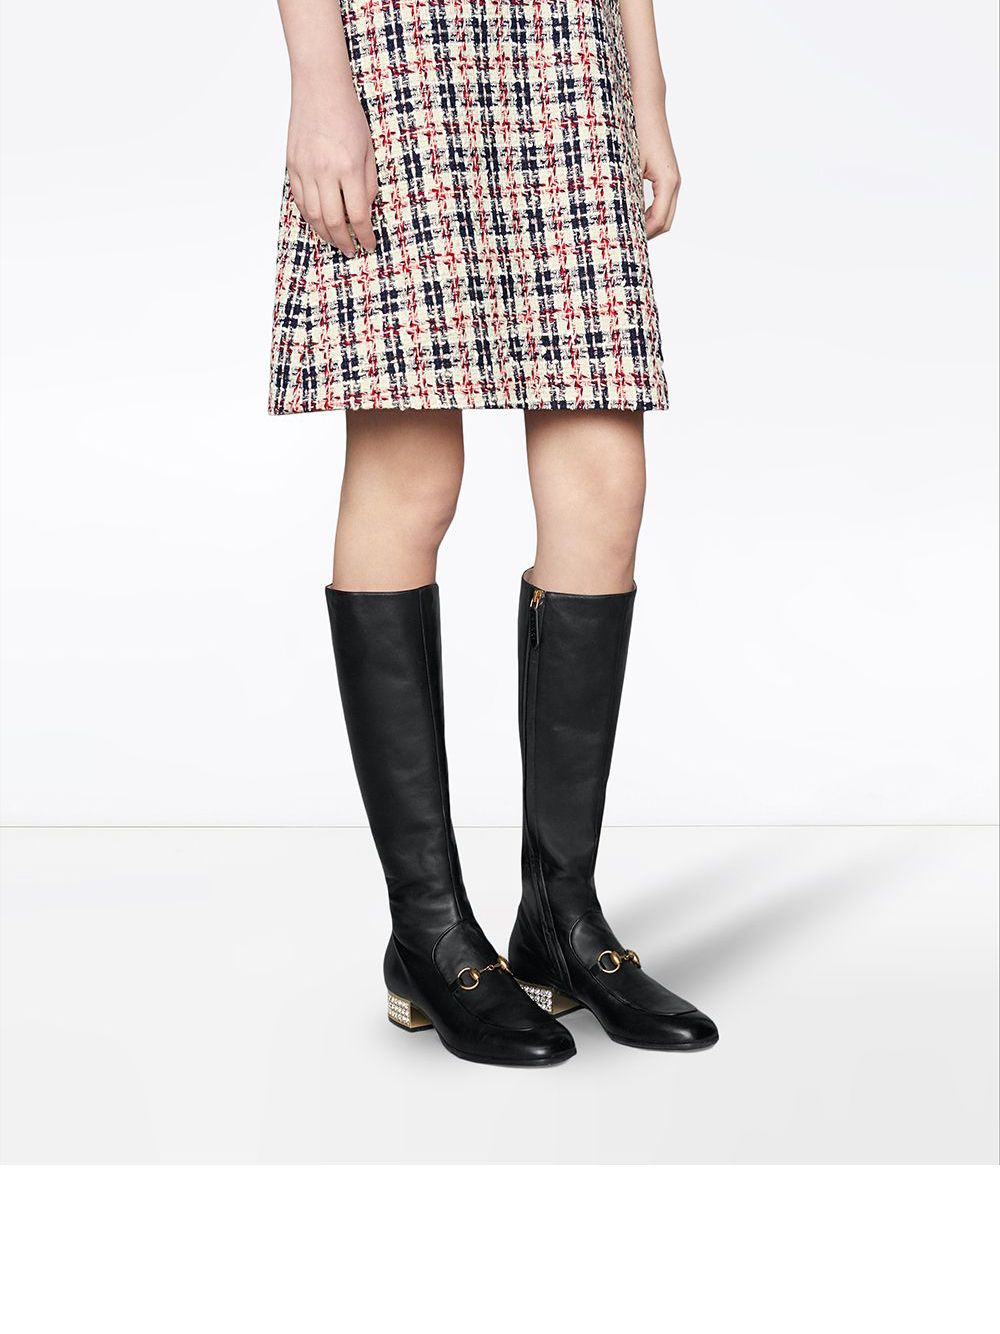 Gucci Horsebit Leather Knee Boot With Crystals - Farfetch